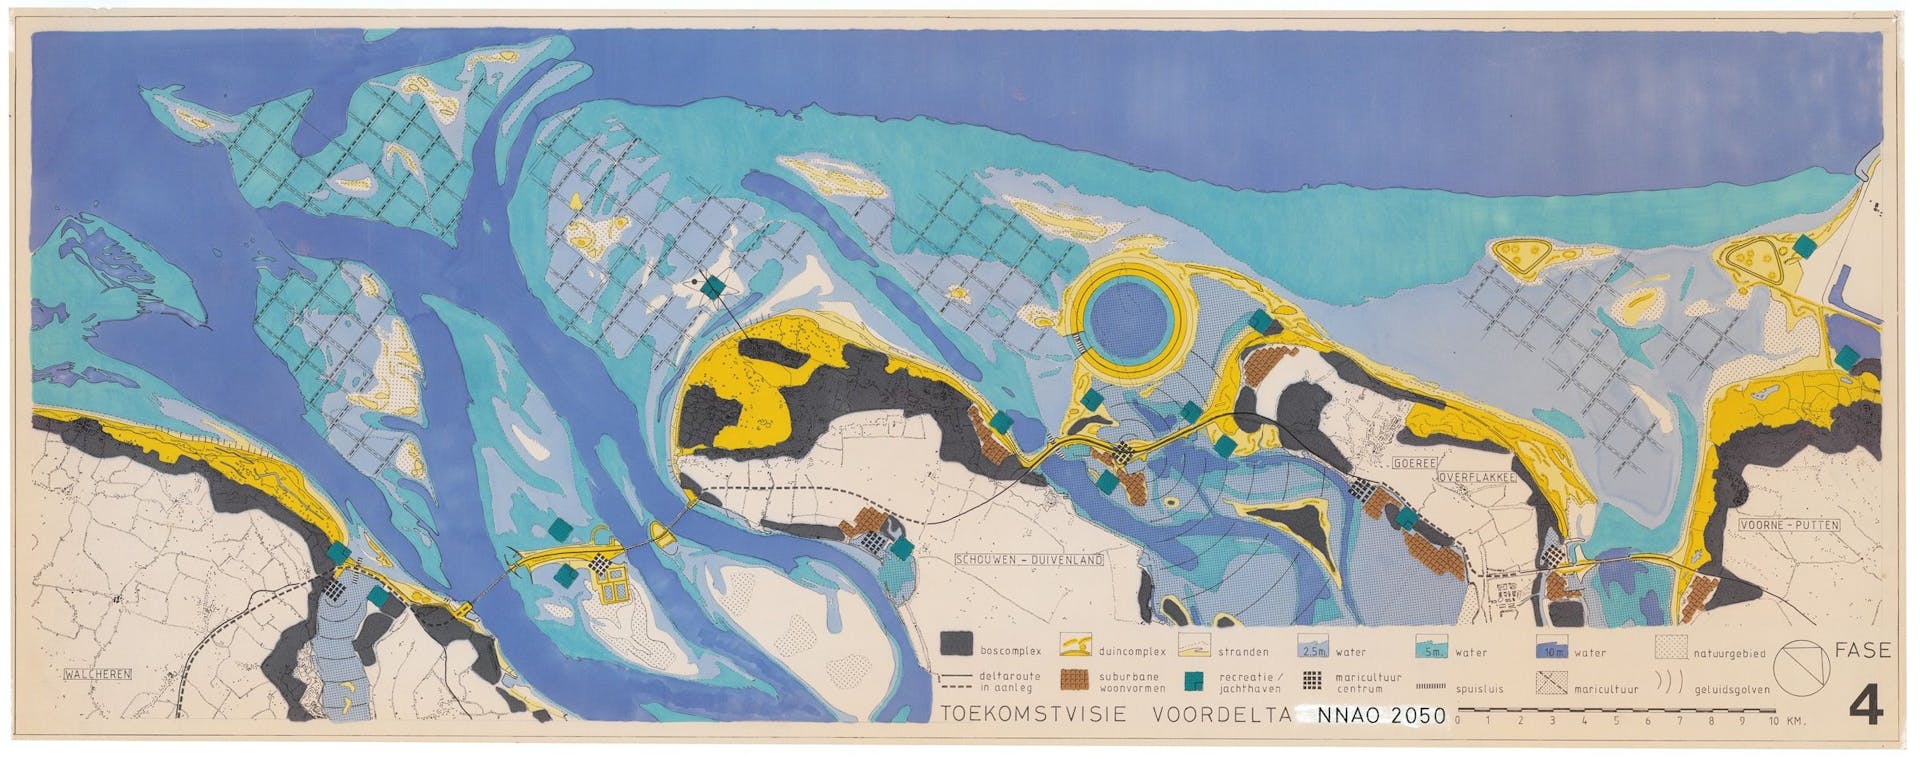 Peter Terreehorst. Future vision with cultivation ponds along the Zeeland coast, phase 4 (2050), 1986-1987. Collection Het Nieuwe Instituut, NNAO 544-4